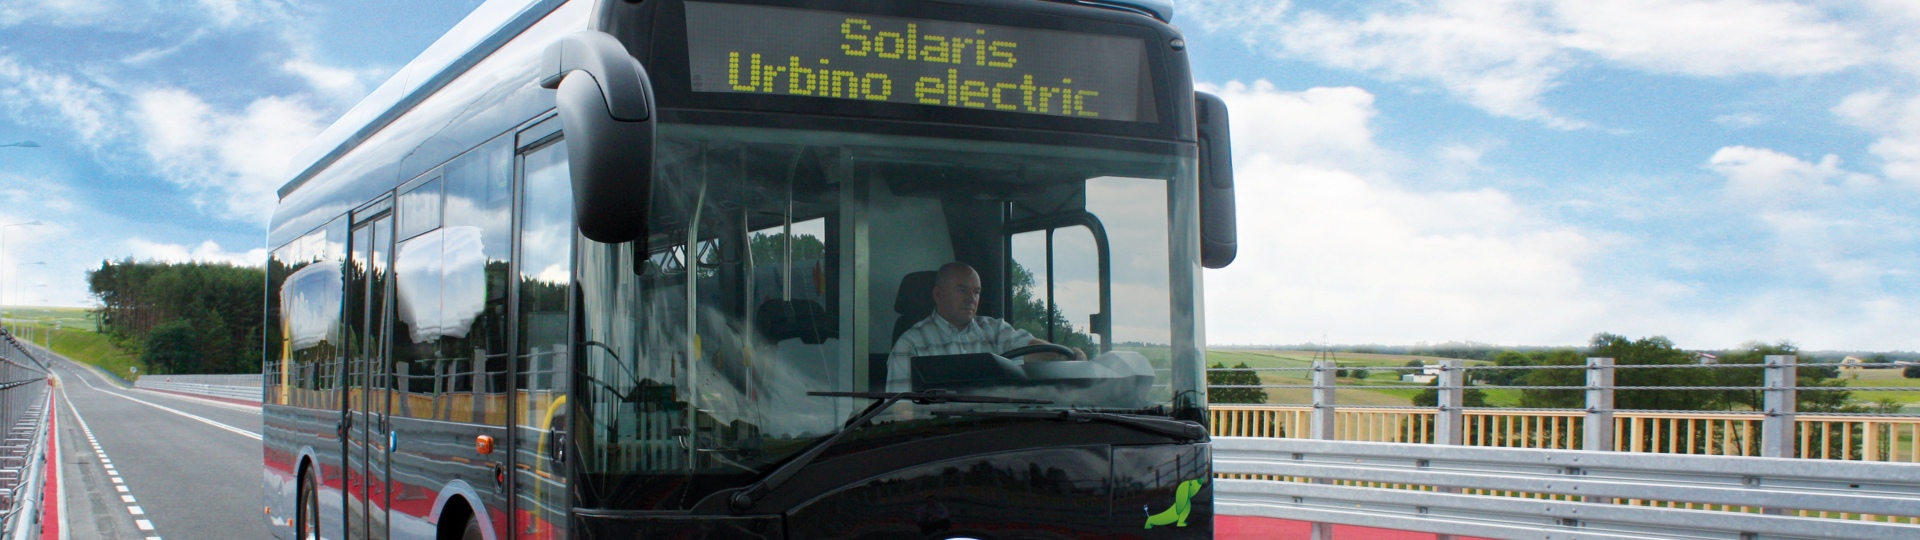 Solaris will deliver first electric buses to the capital of Europe